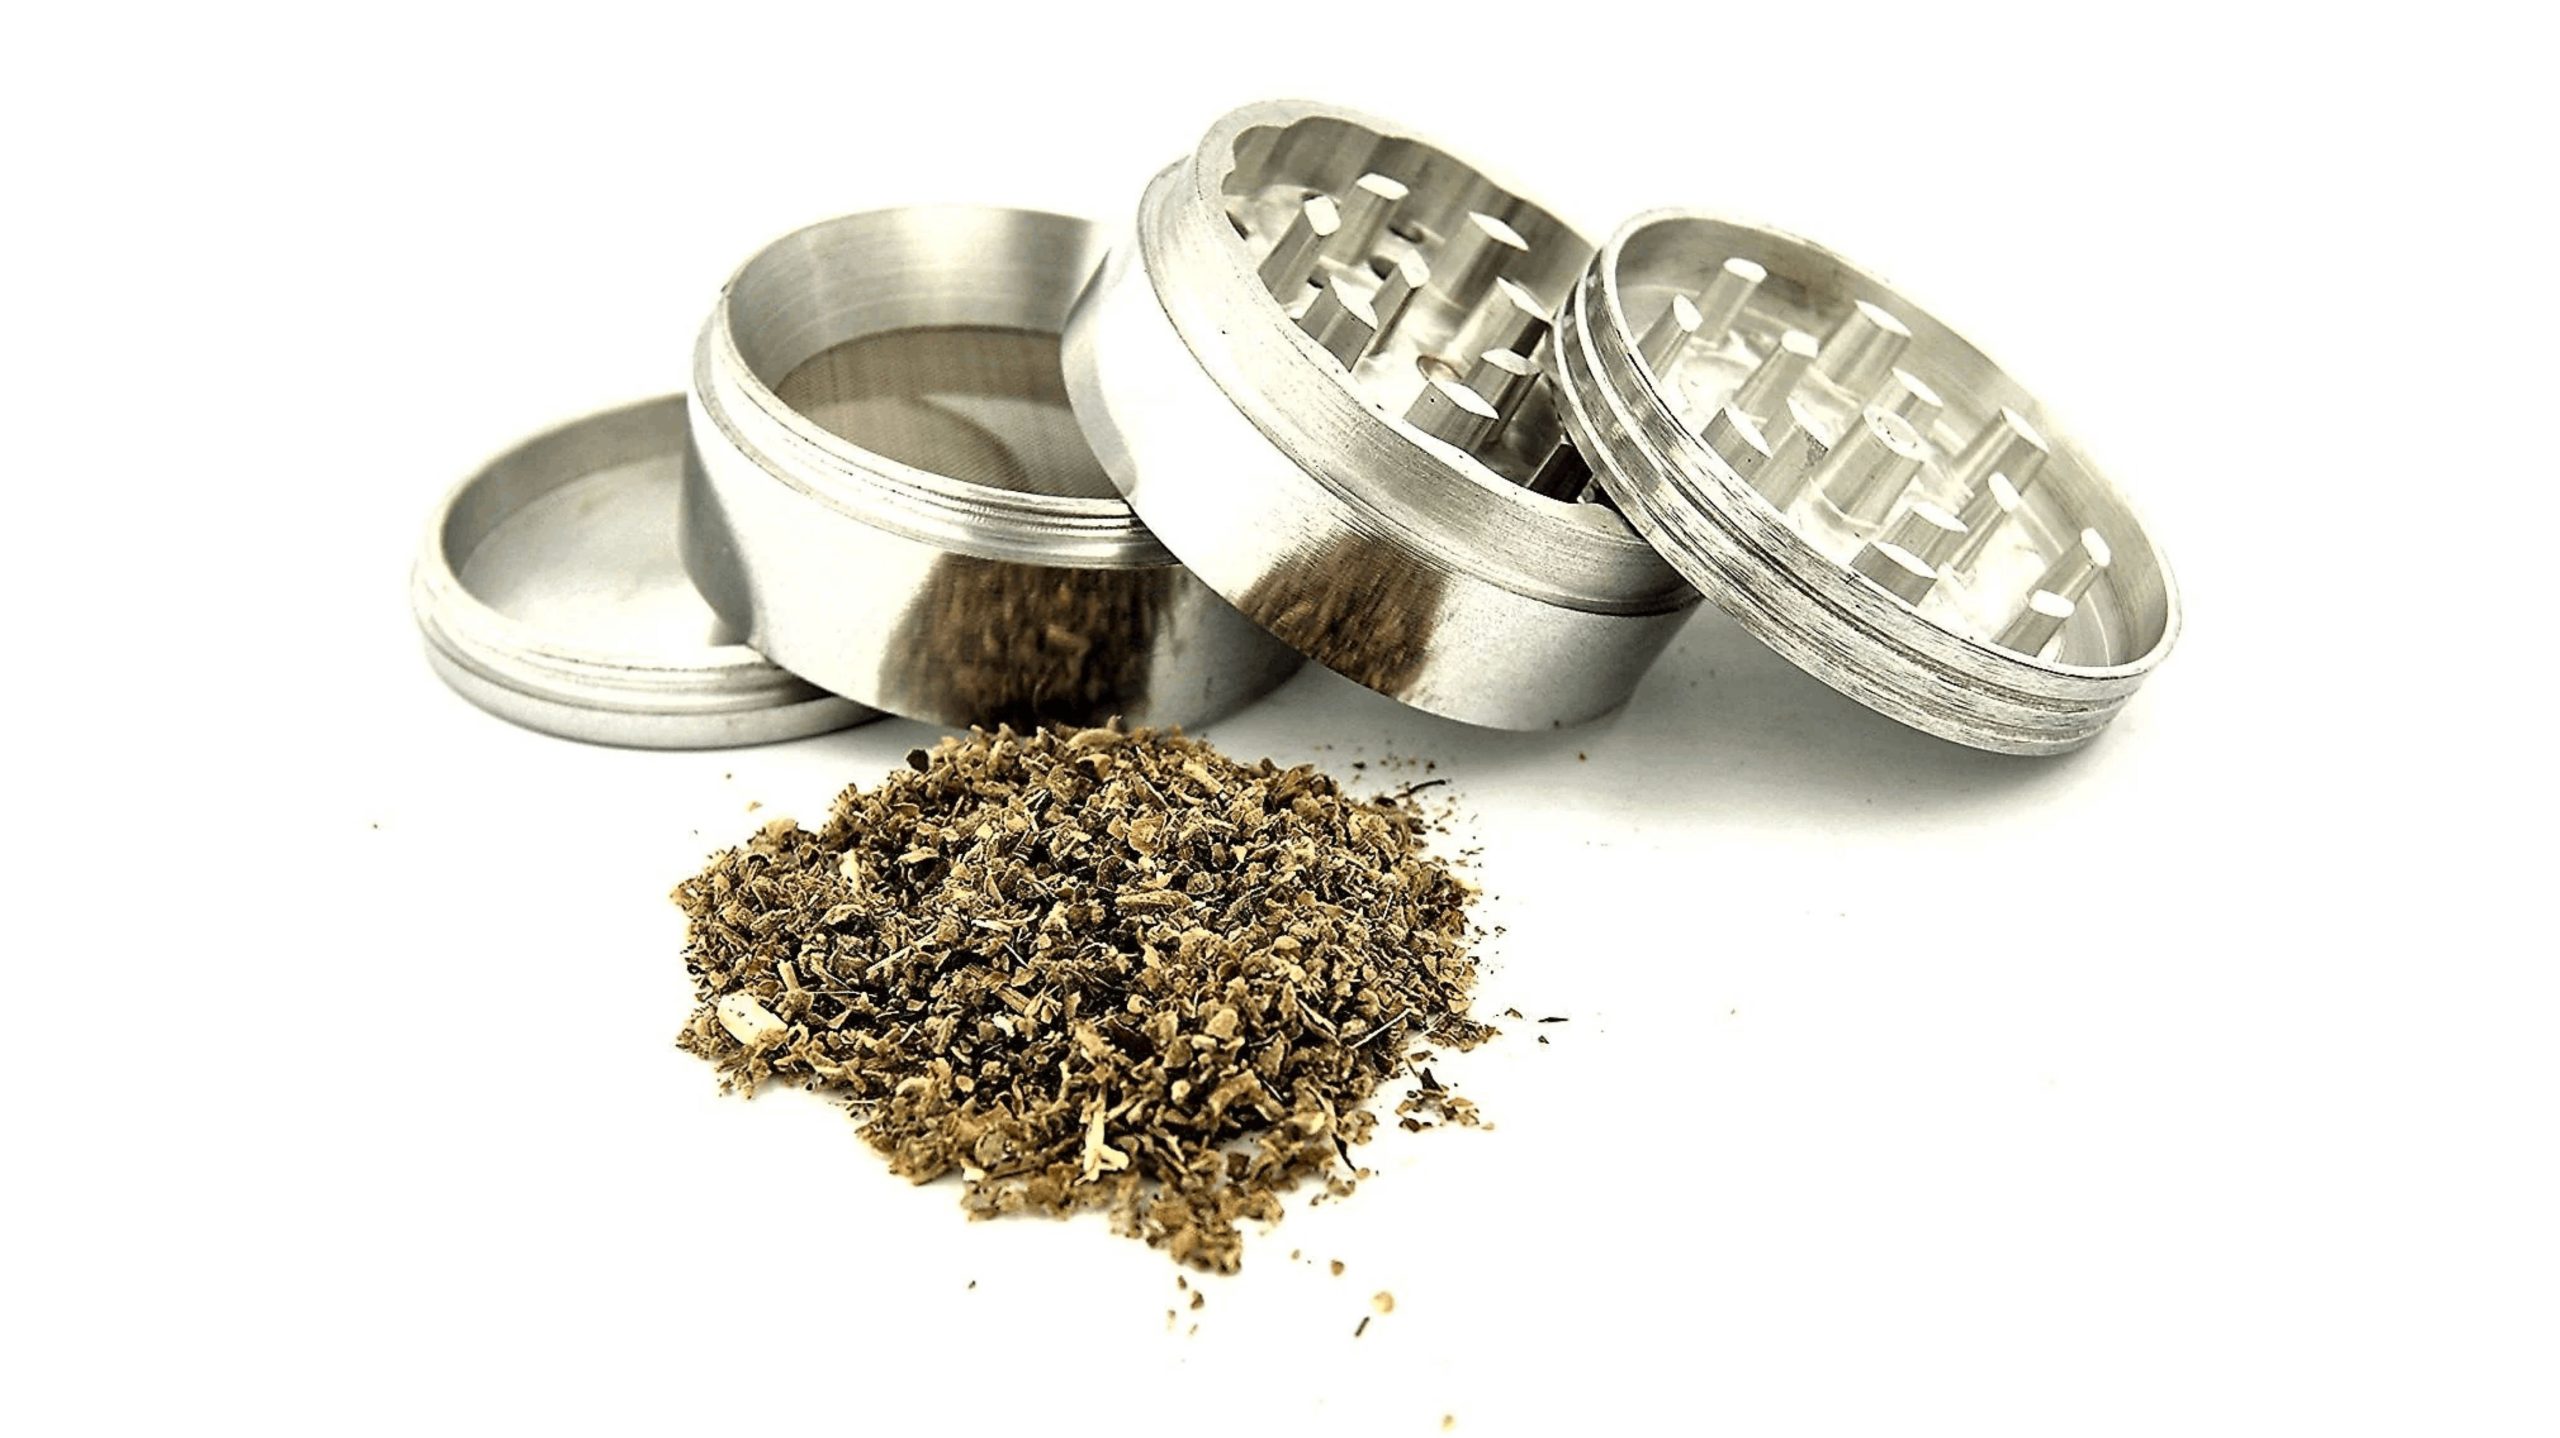 In short, a grinder for weed is a handy tool you can use to break up dried cannabis buds into smaller pieces, making it easier to use in a joint, pipe, or a device like a vaporizer. 